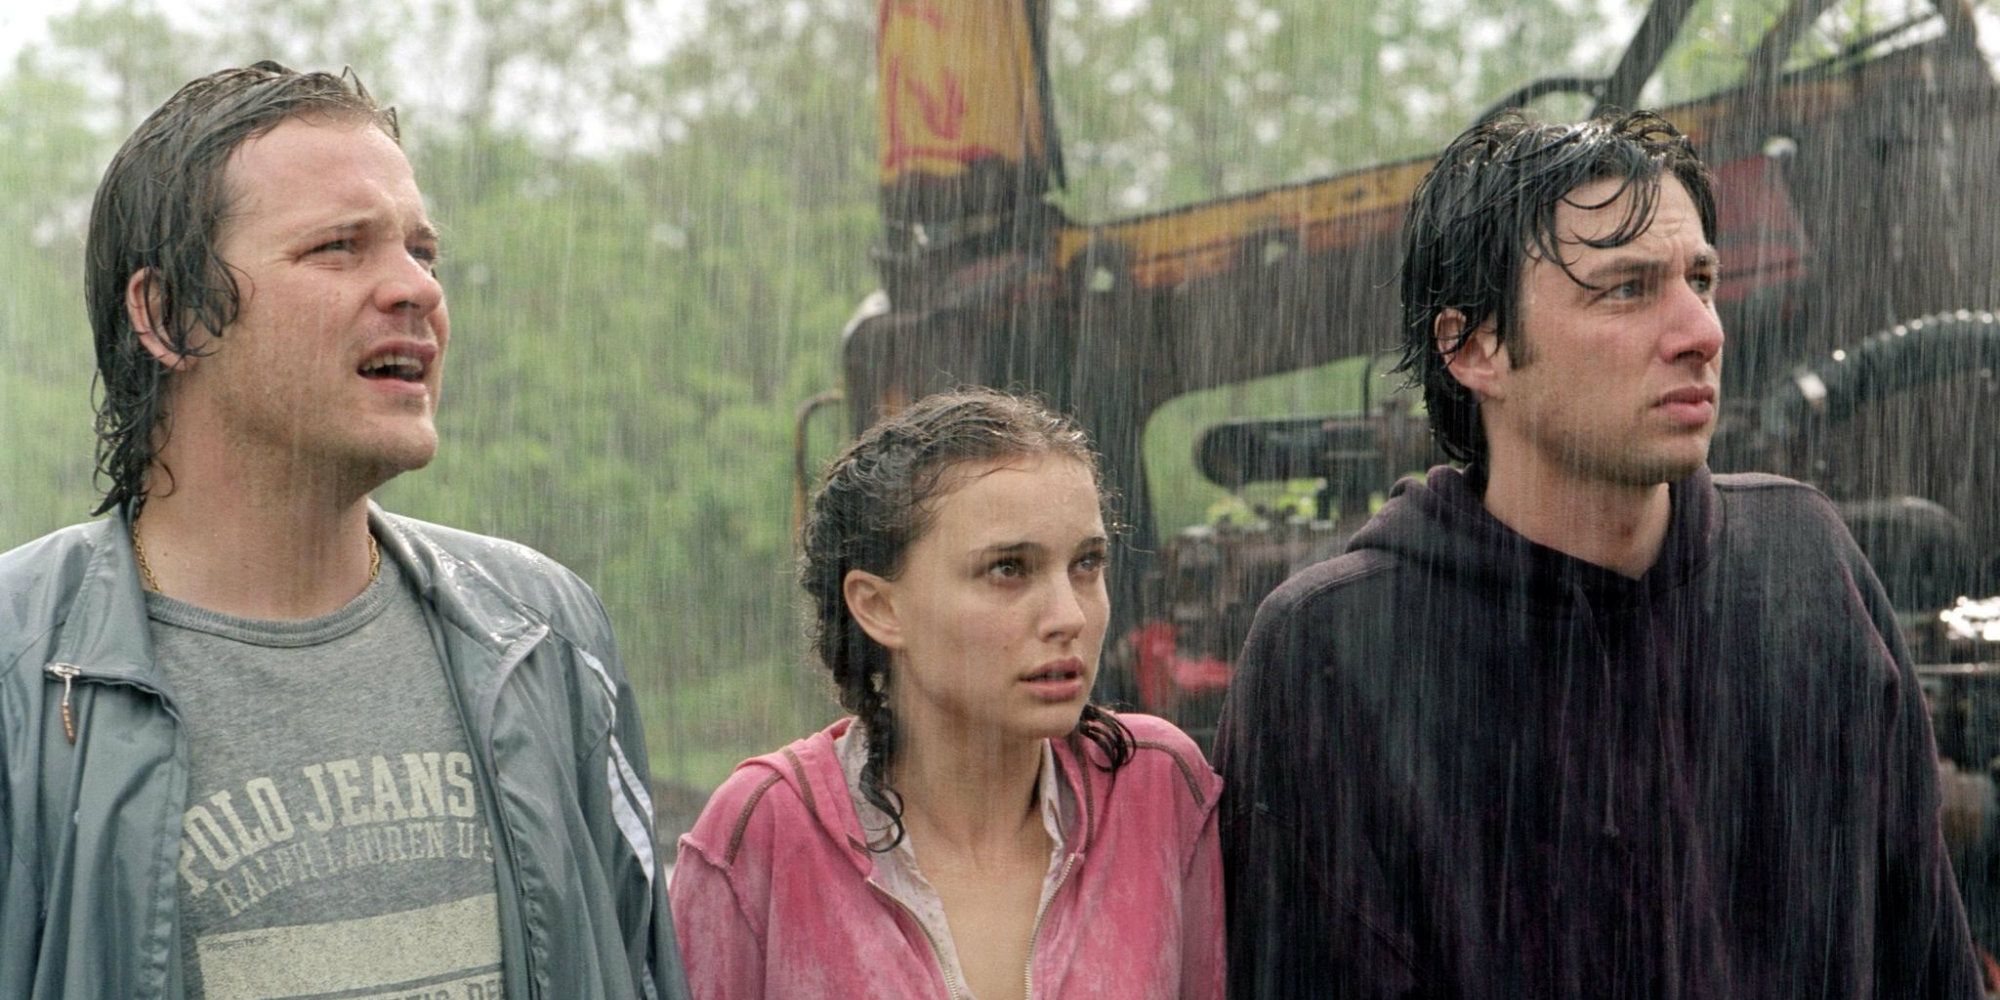 Mark, Sam, and Andrew under the rain in Garden State